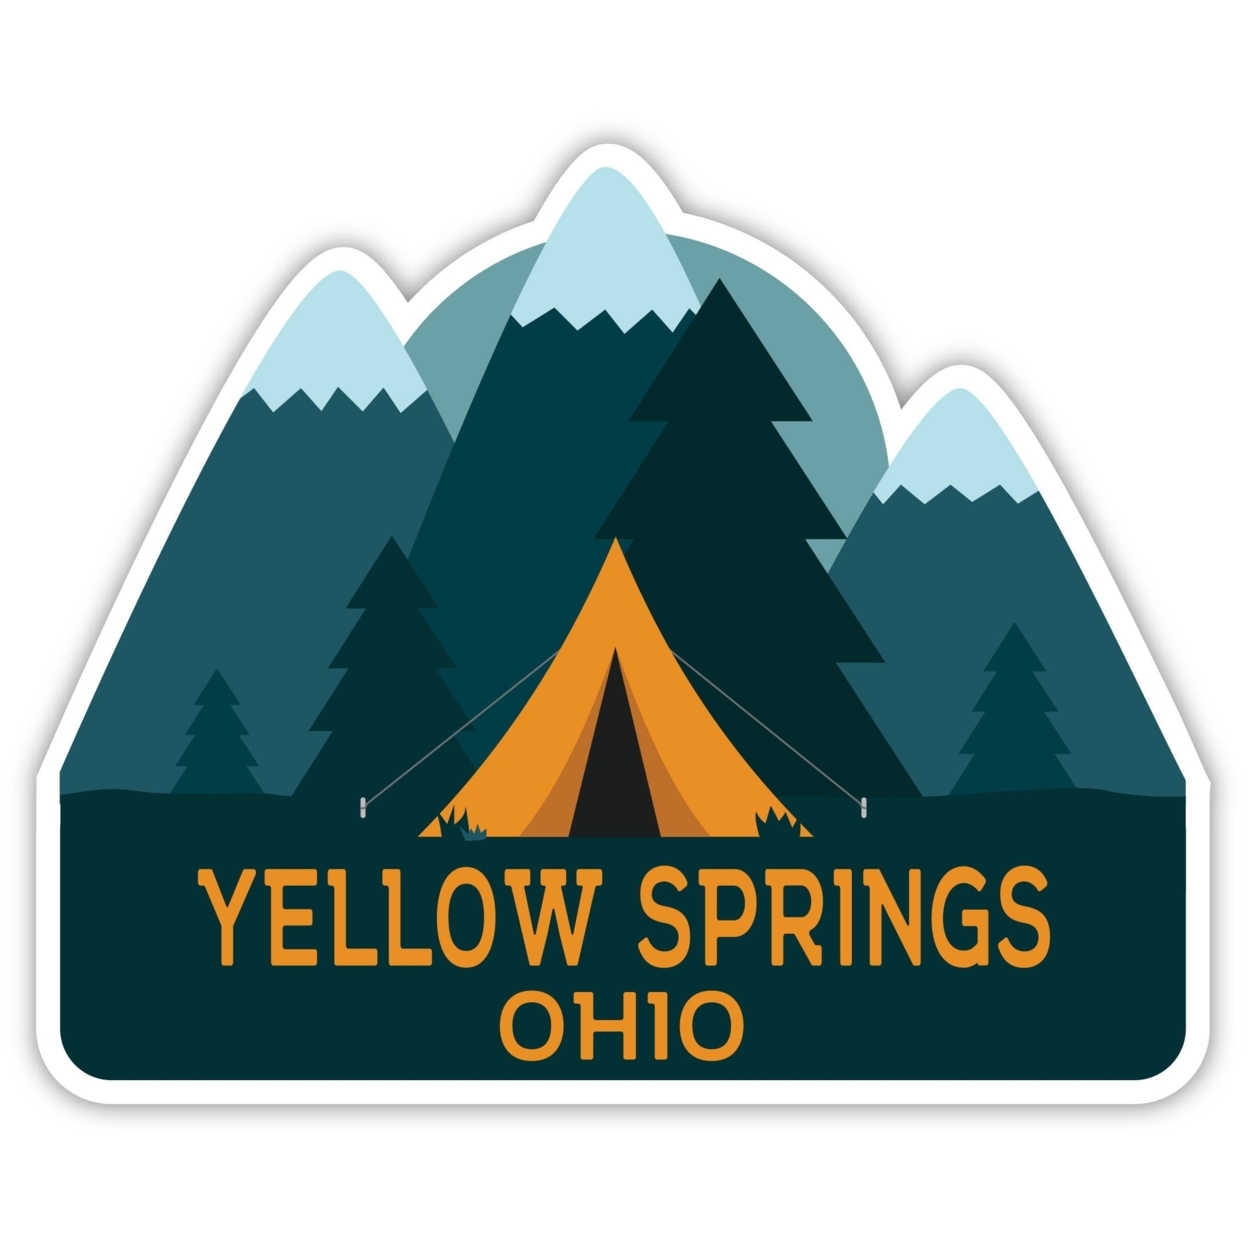 Yellow Springs Ohio Souvenir Decorative Stickers (Choose Theme And Size) - Single Unit, 2-Inch, Tent